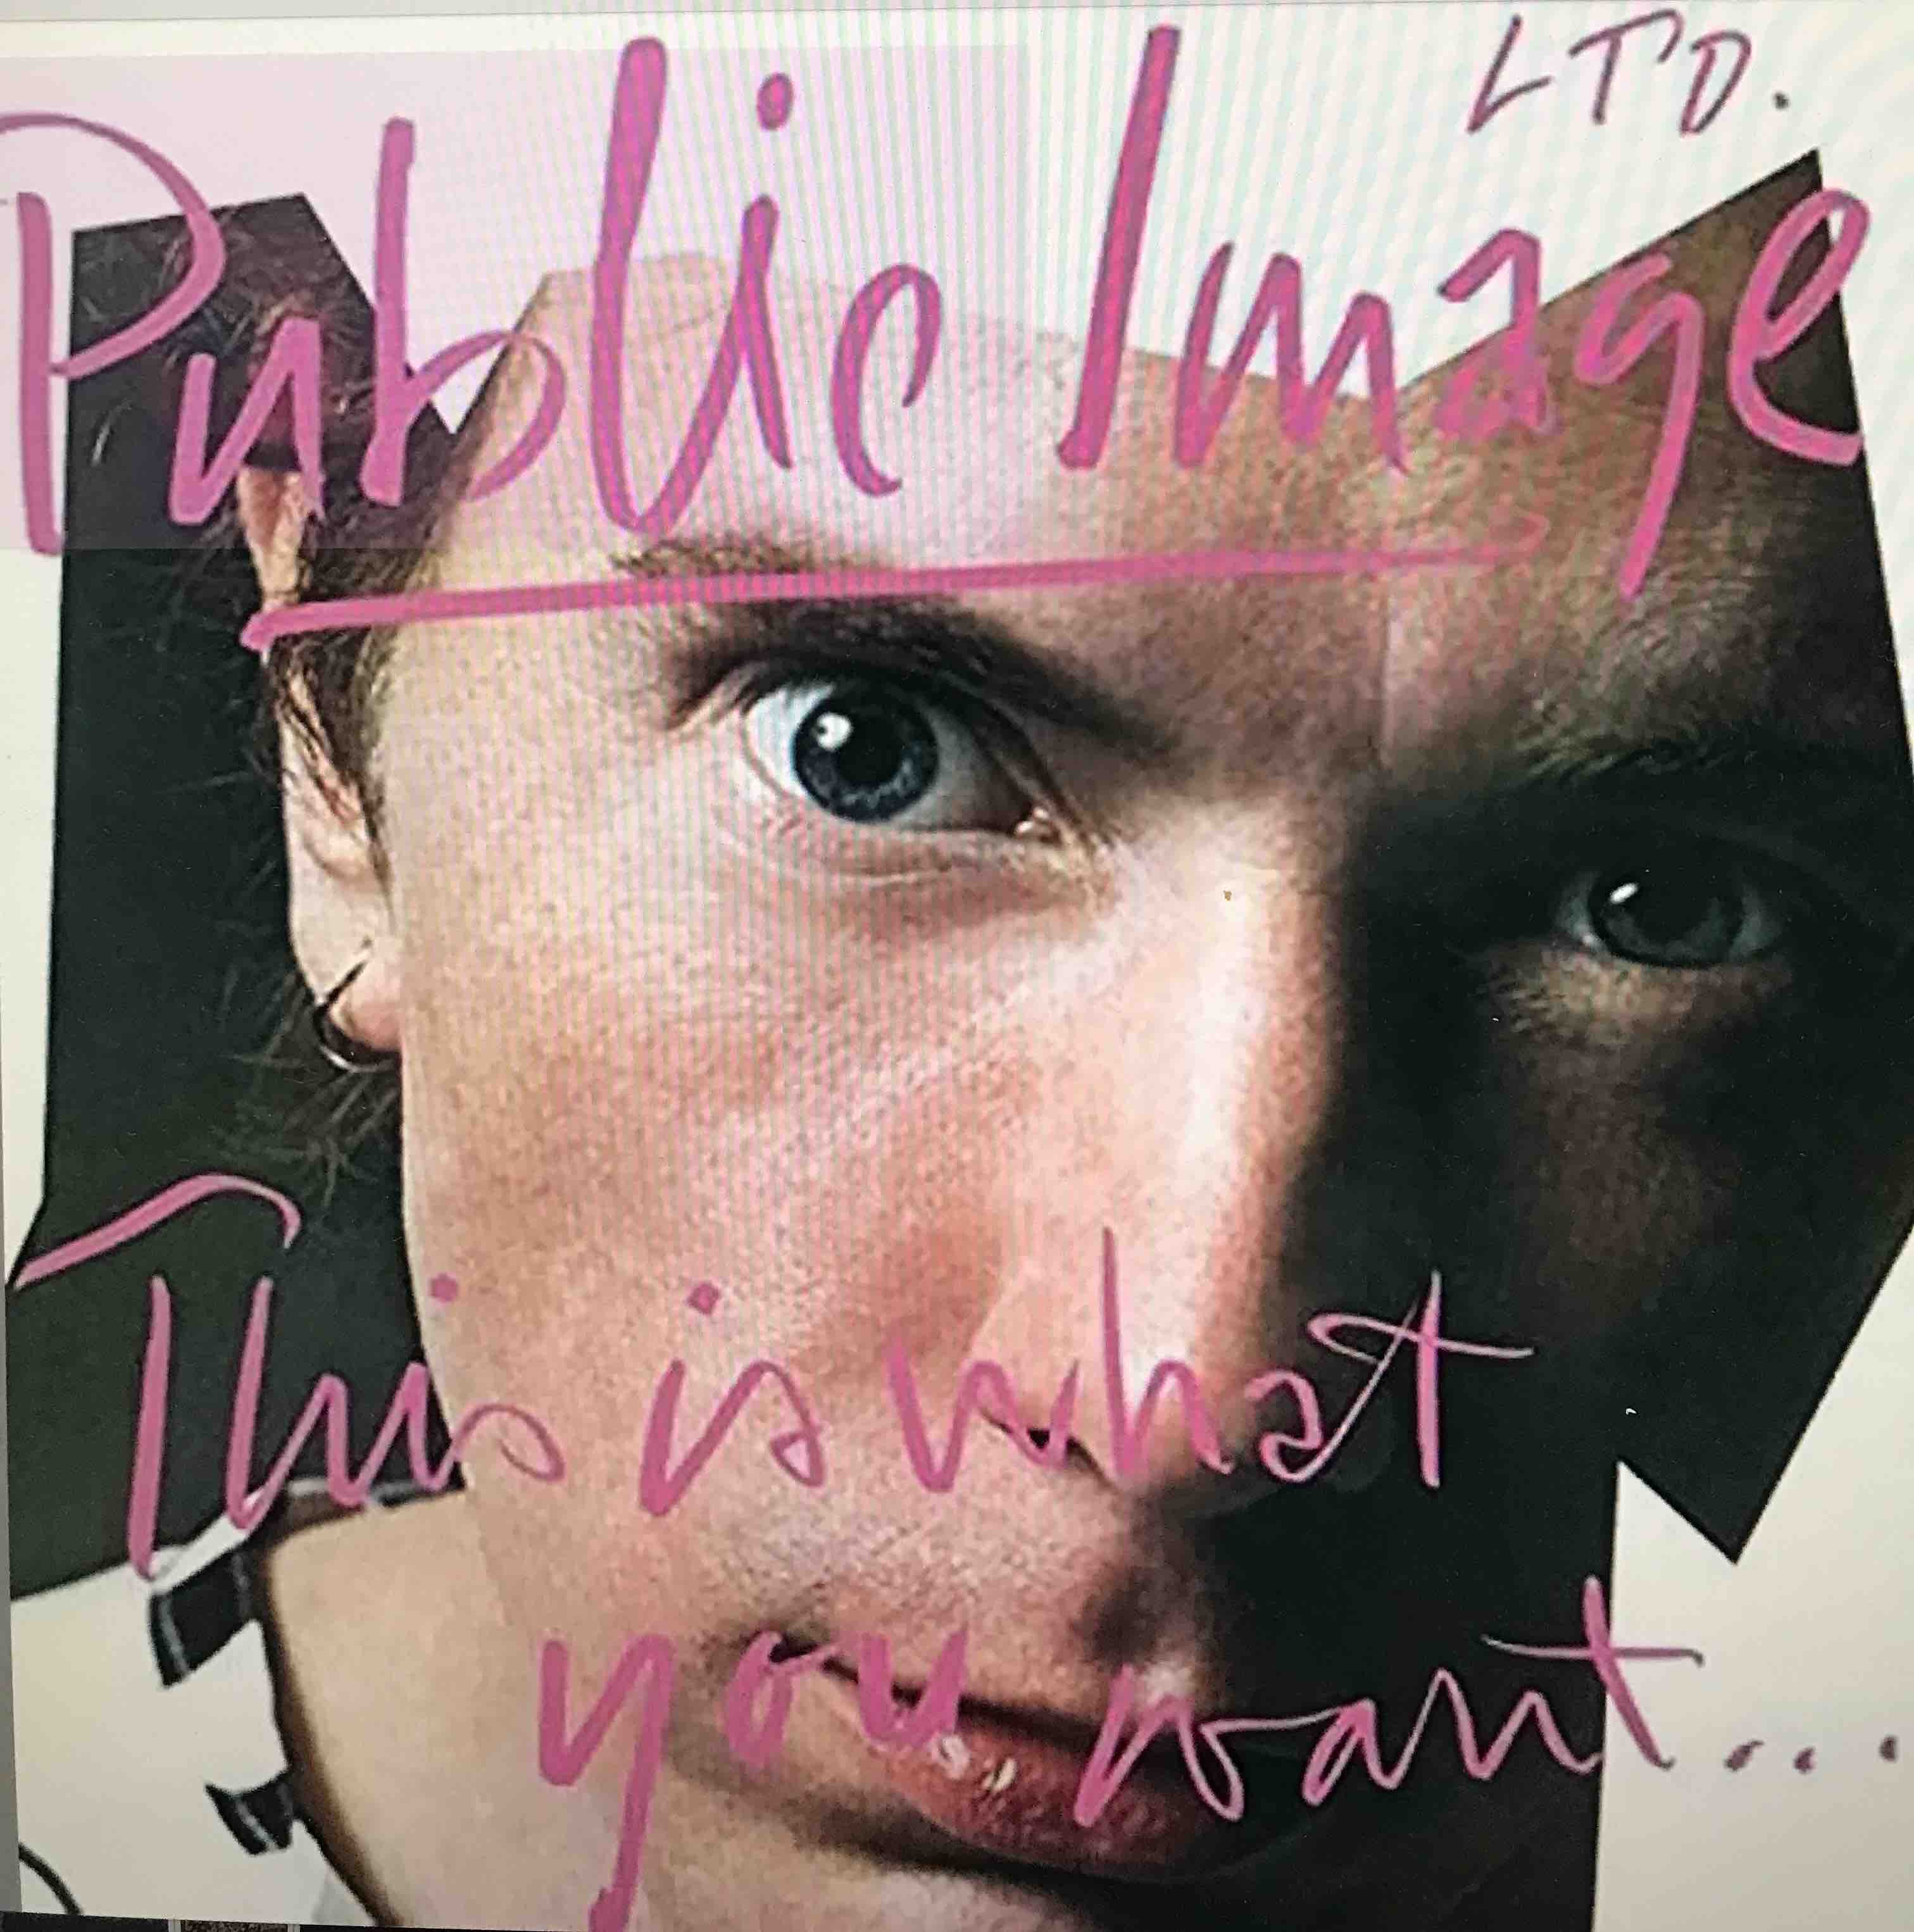 Public Image Ltd. ‎– This Is What You Want... This Is What You Get